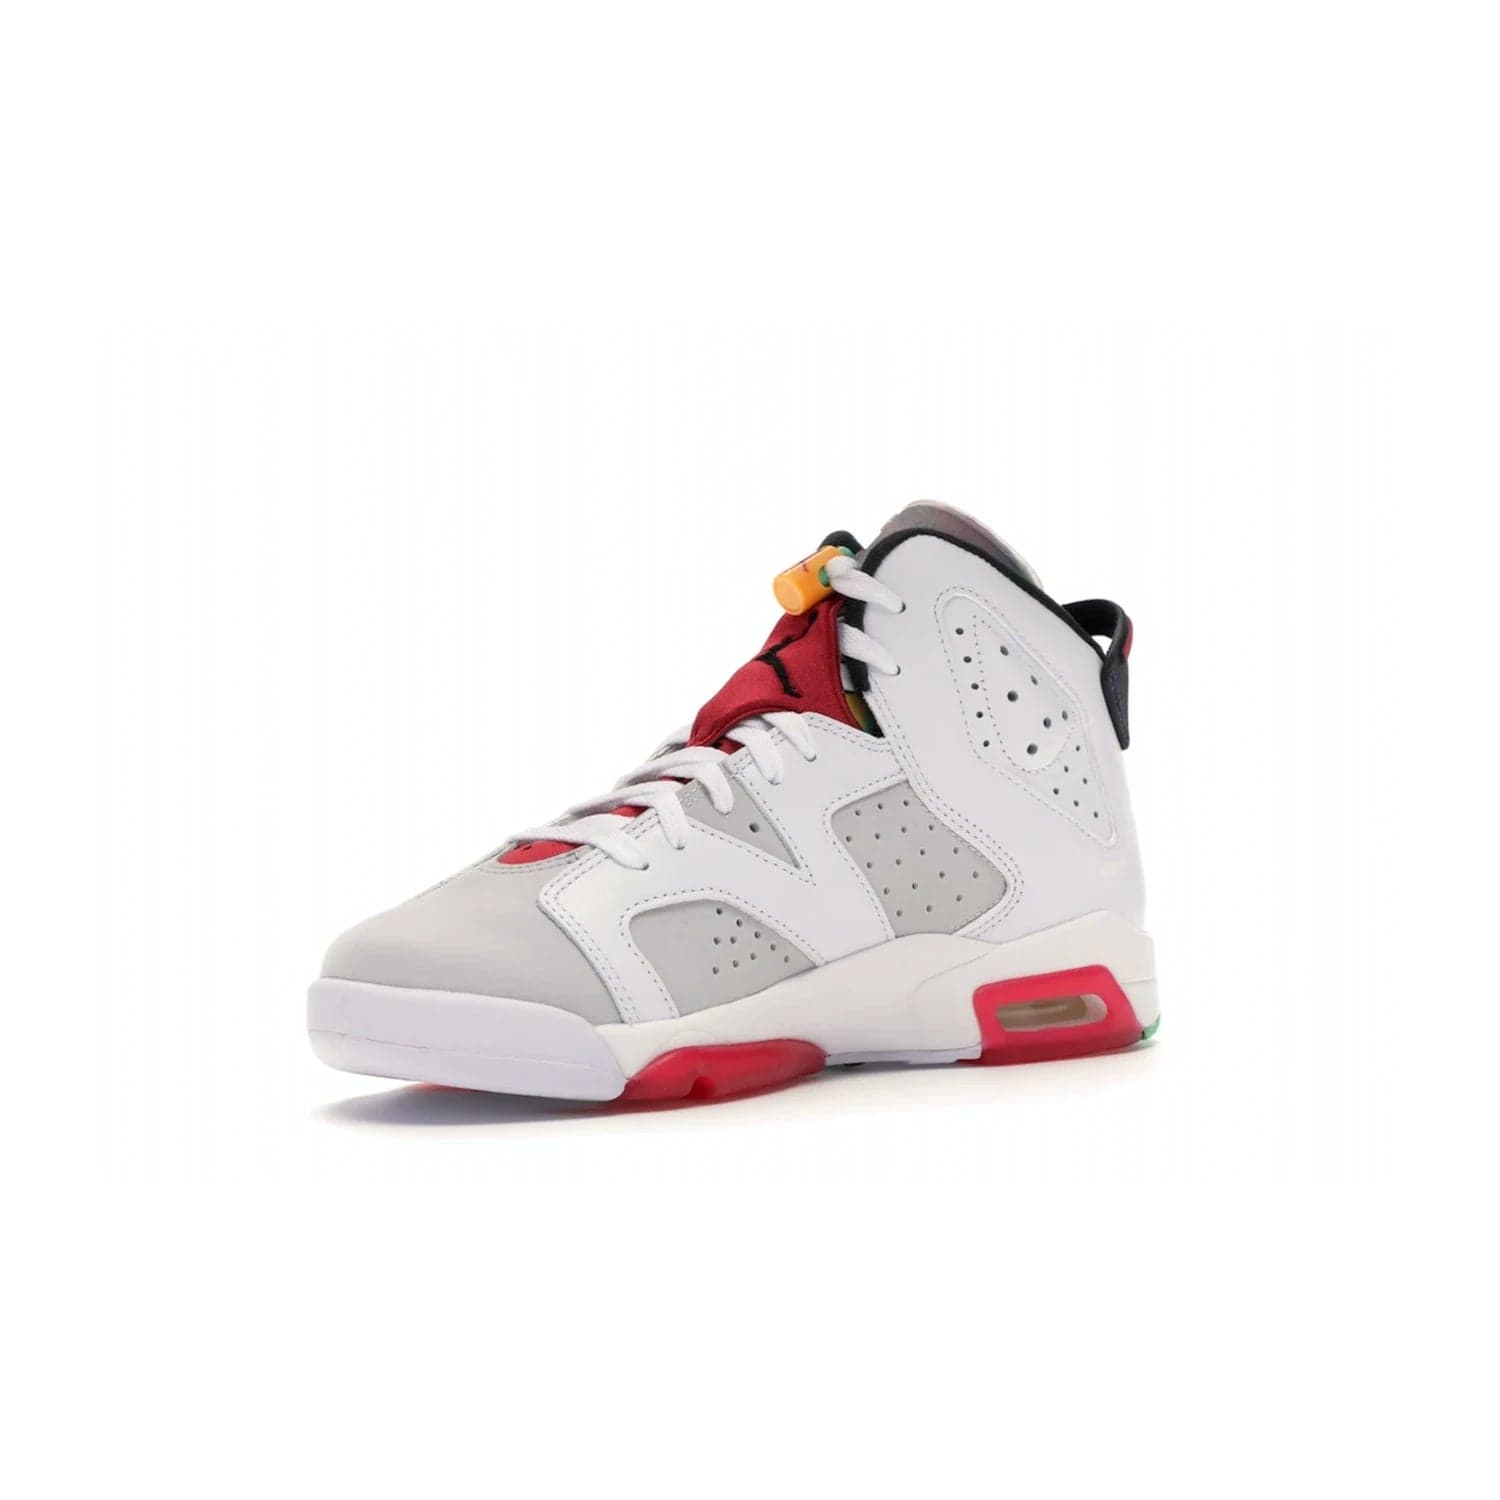 Jordan 6 Retro Hare (GS) - Image 15 - Only at www.BallersClubKickz.com - The Air Jordan 6 Hare GS. Comfortable suede upper, perforations, red pods, two-tone midsole, and signature "Jumpman" emblem. Released 17 June 2020. Perfect for any sneakerhead.